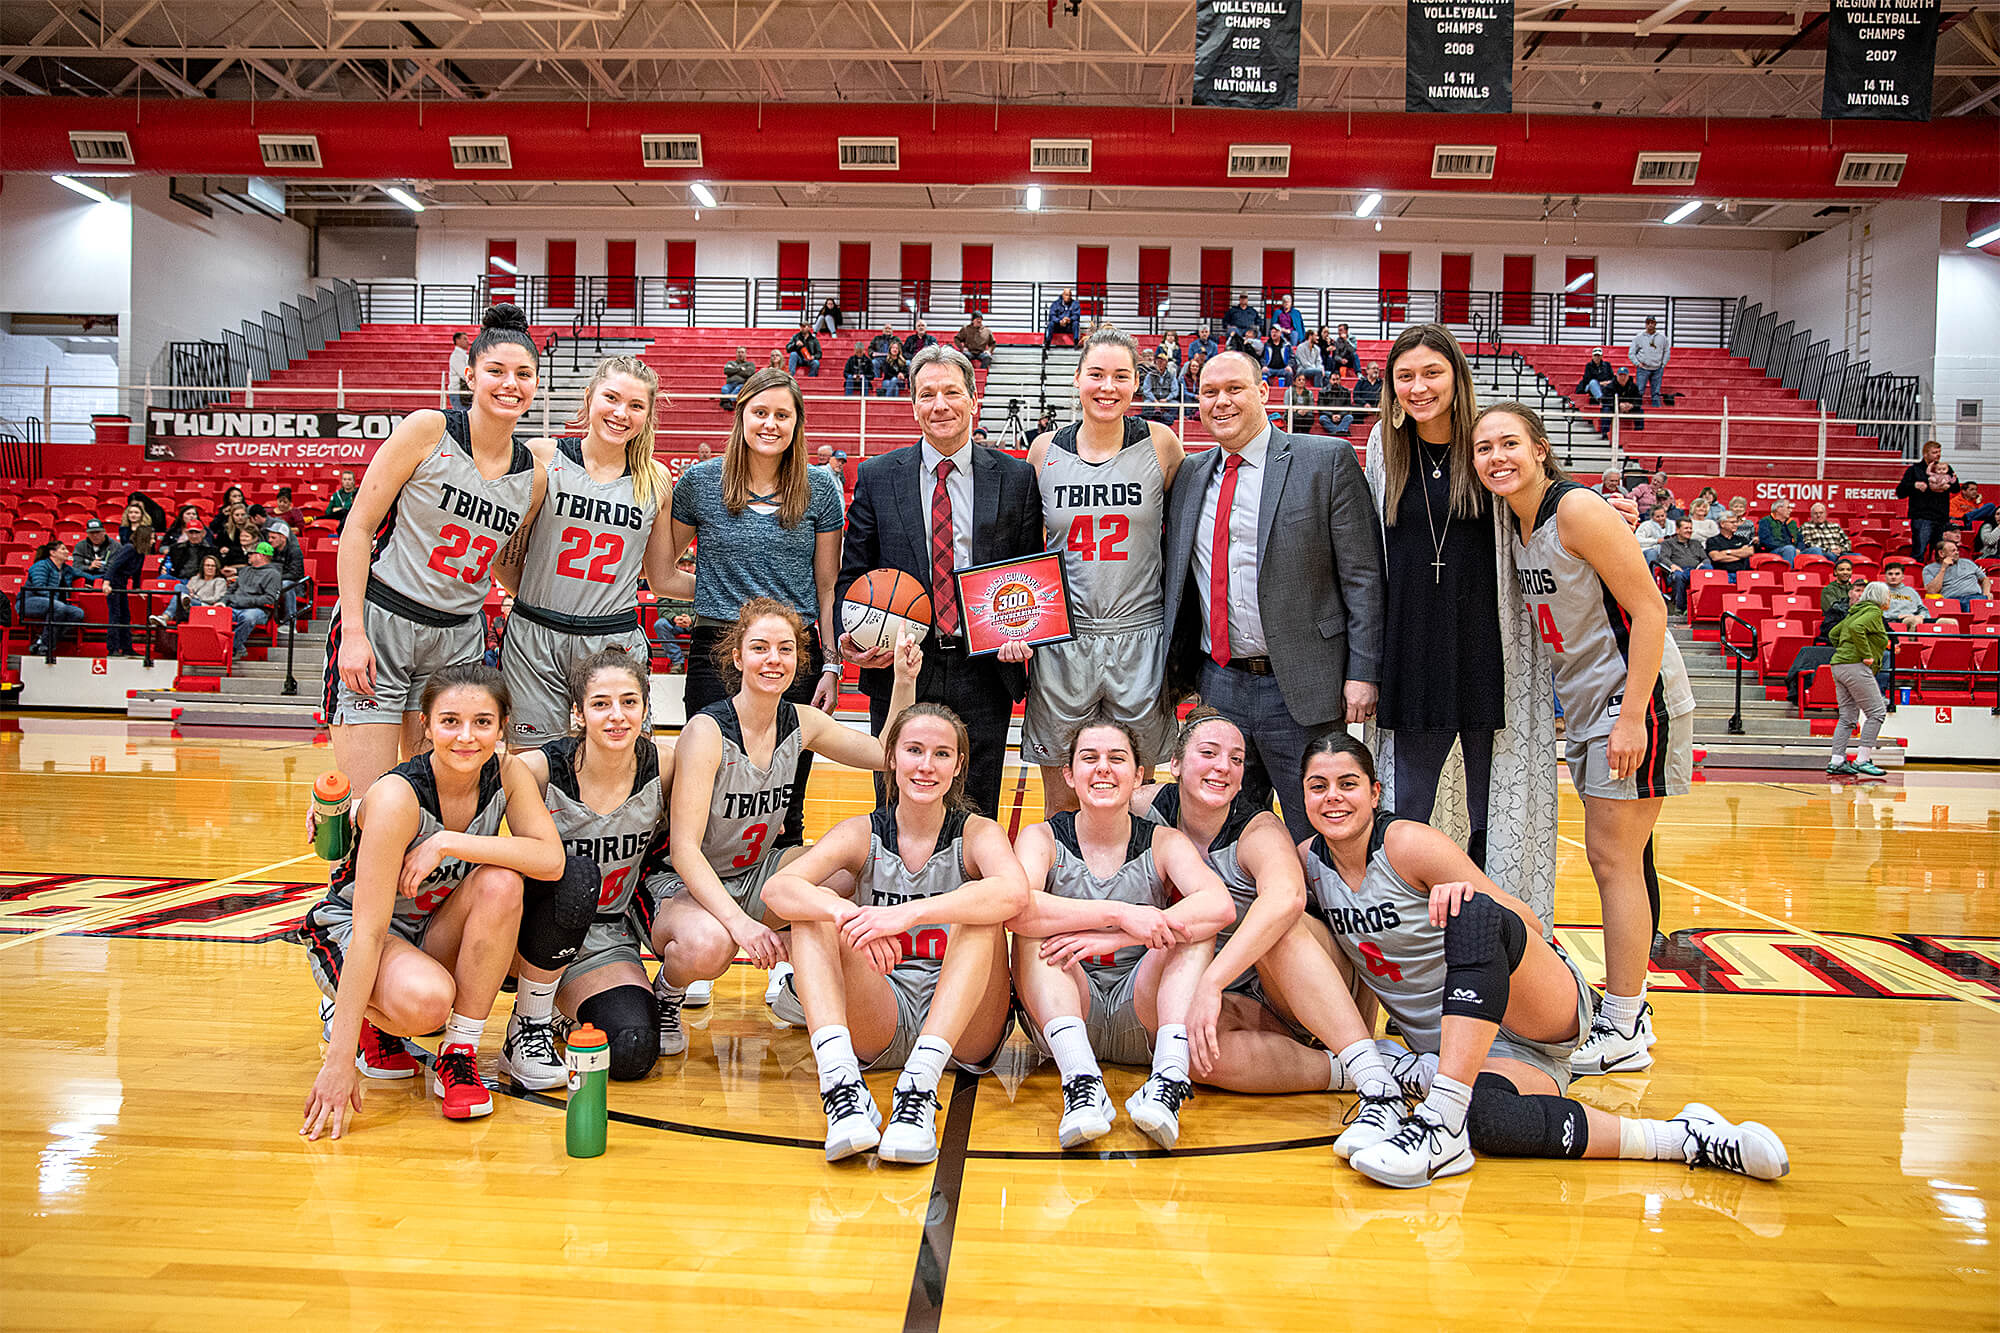 Group photo of the Casper College Women's Basketball team and coaches.